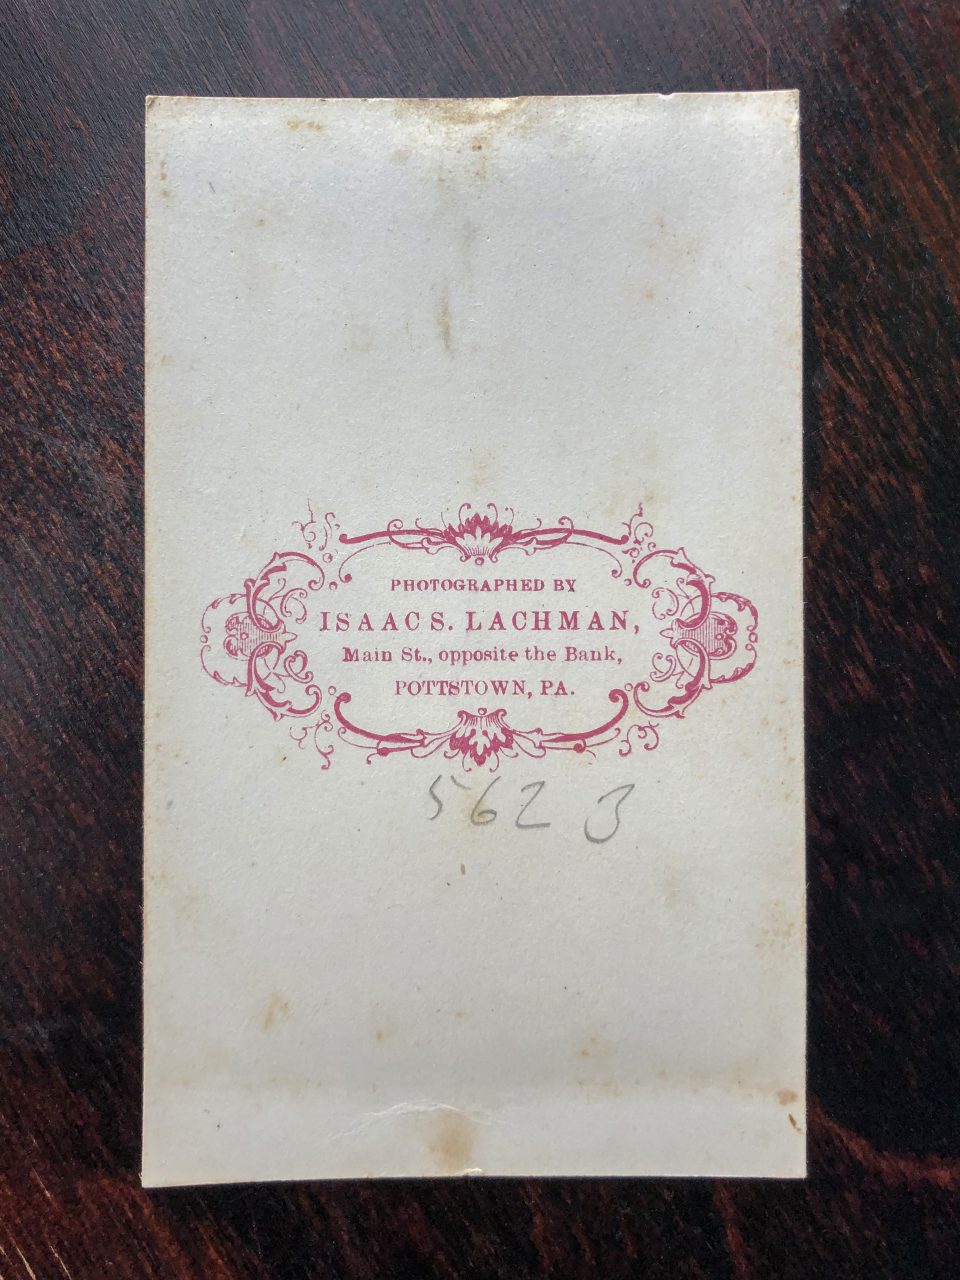 The back of this CDV photograph shows the imprint in red ink of Pottstown-based photographer Isaac S. Lachman. His studio was located on Main Street, across from the bank. In pencil, we see the handwritten number 5623, which probably corresponded to the negative number for reprints.